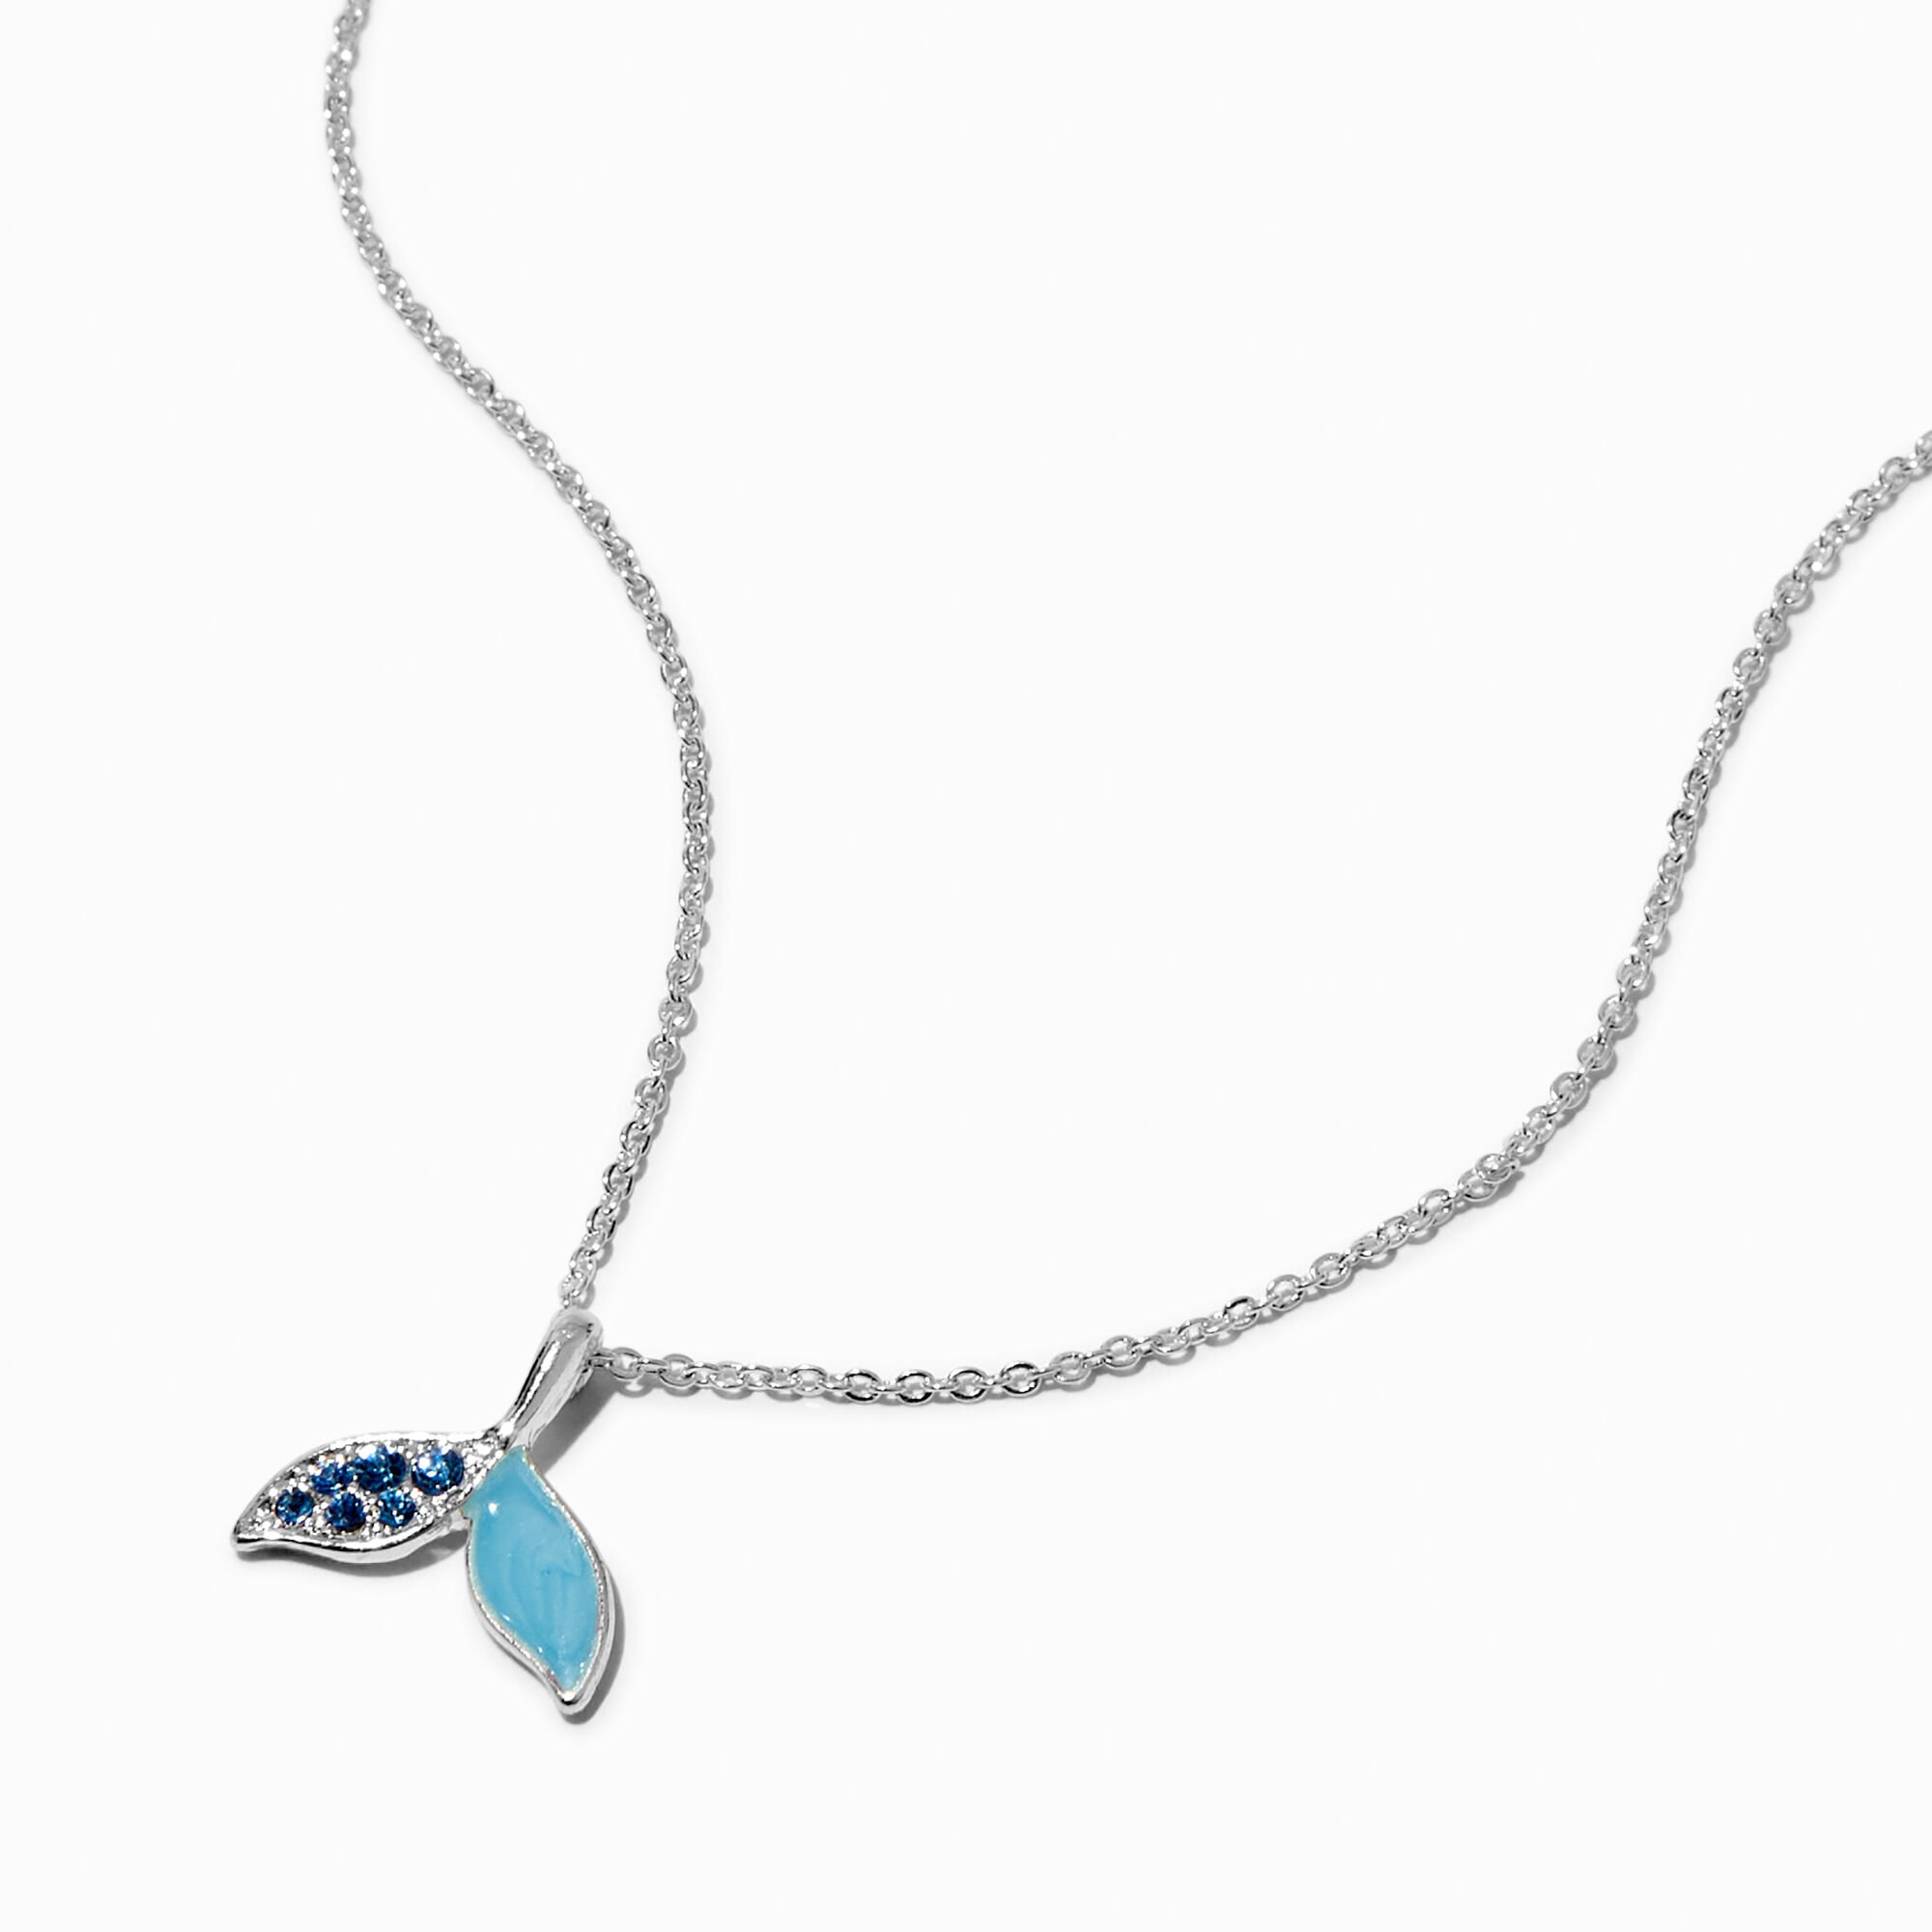 View Claires Mermaid Tail Pendant Necklace Blue information